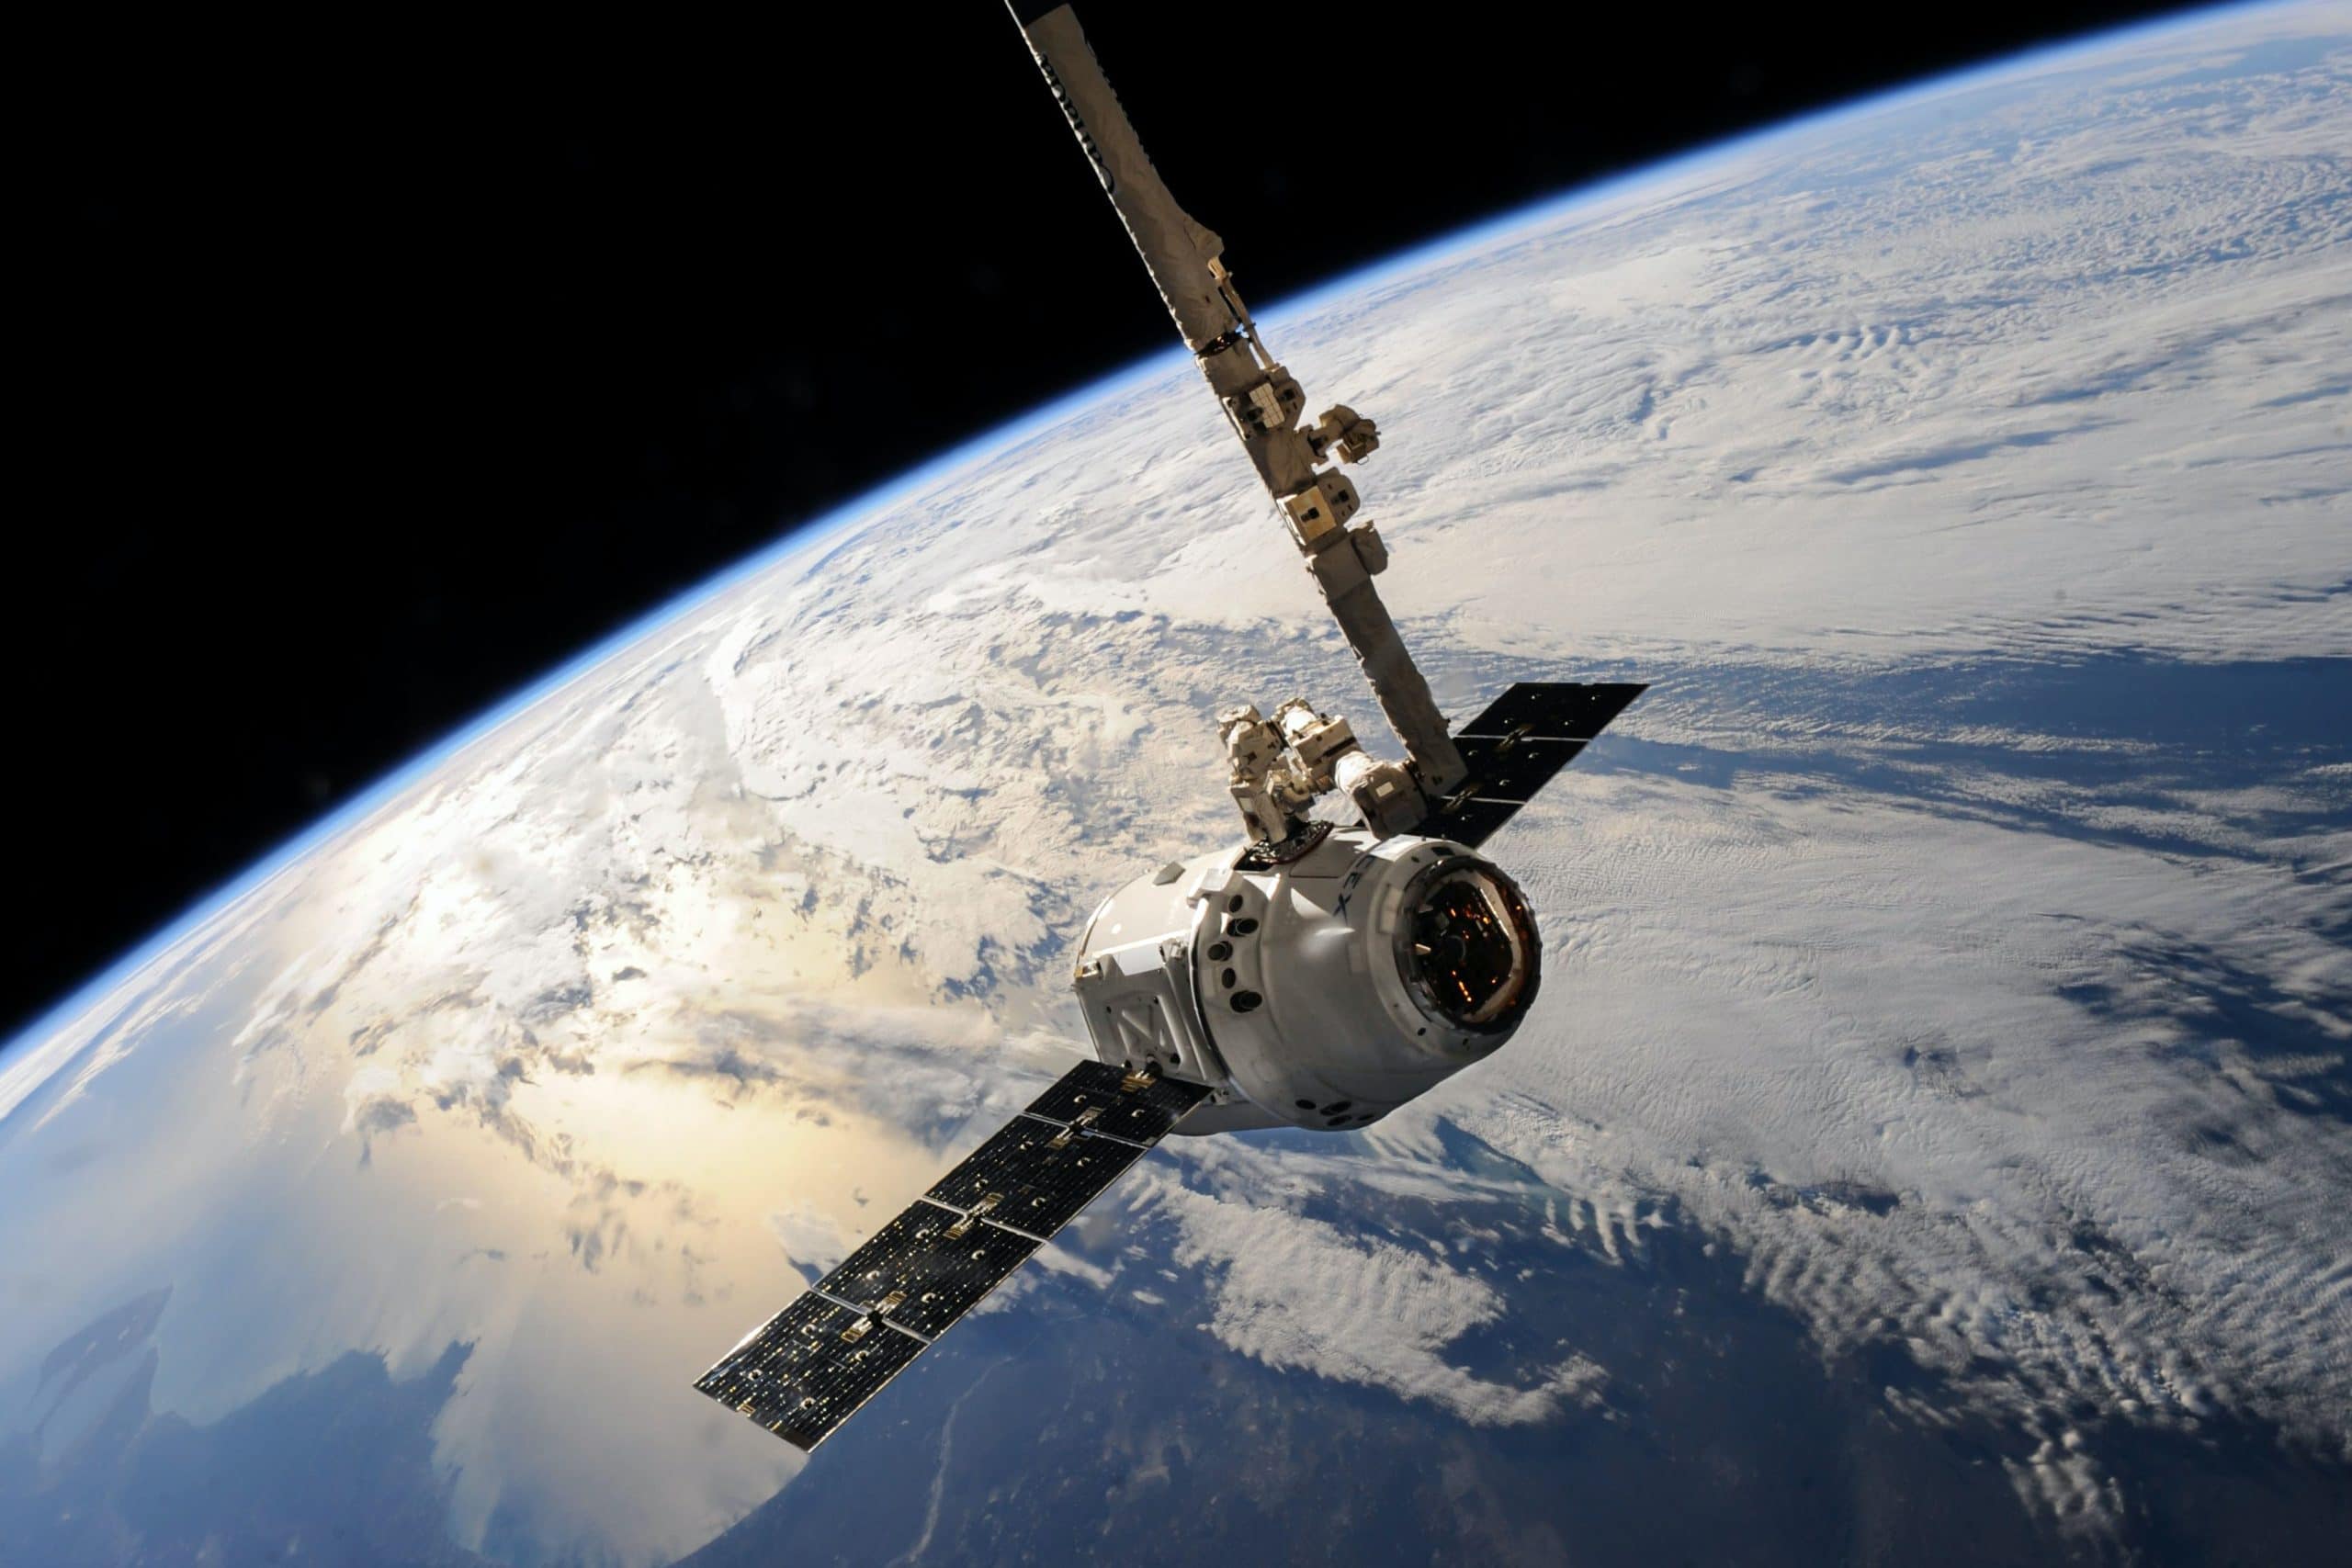 A photo of a satellite in space with the backdrop of Earth. Satellites will be a key component of 5G adoption worldwide that will expand connectivity but also poses new cybersecurity risks. Read more to learn what they are and how to prepare.